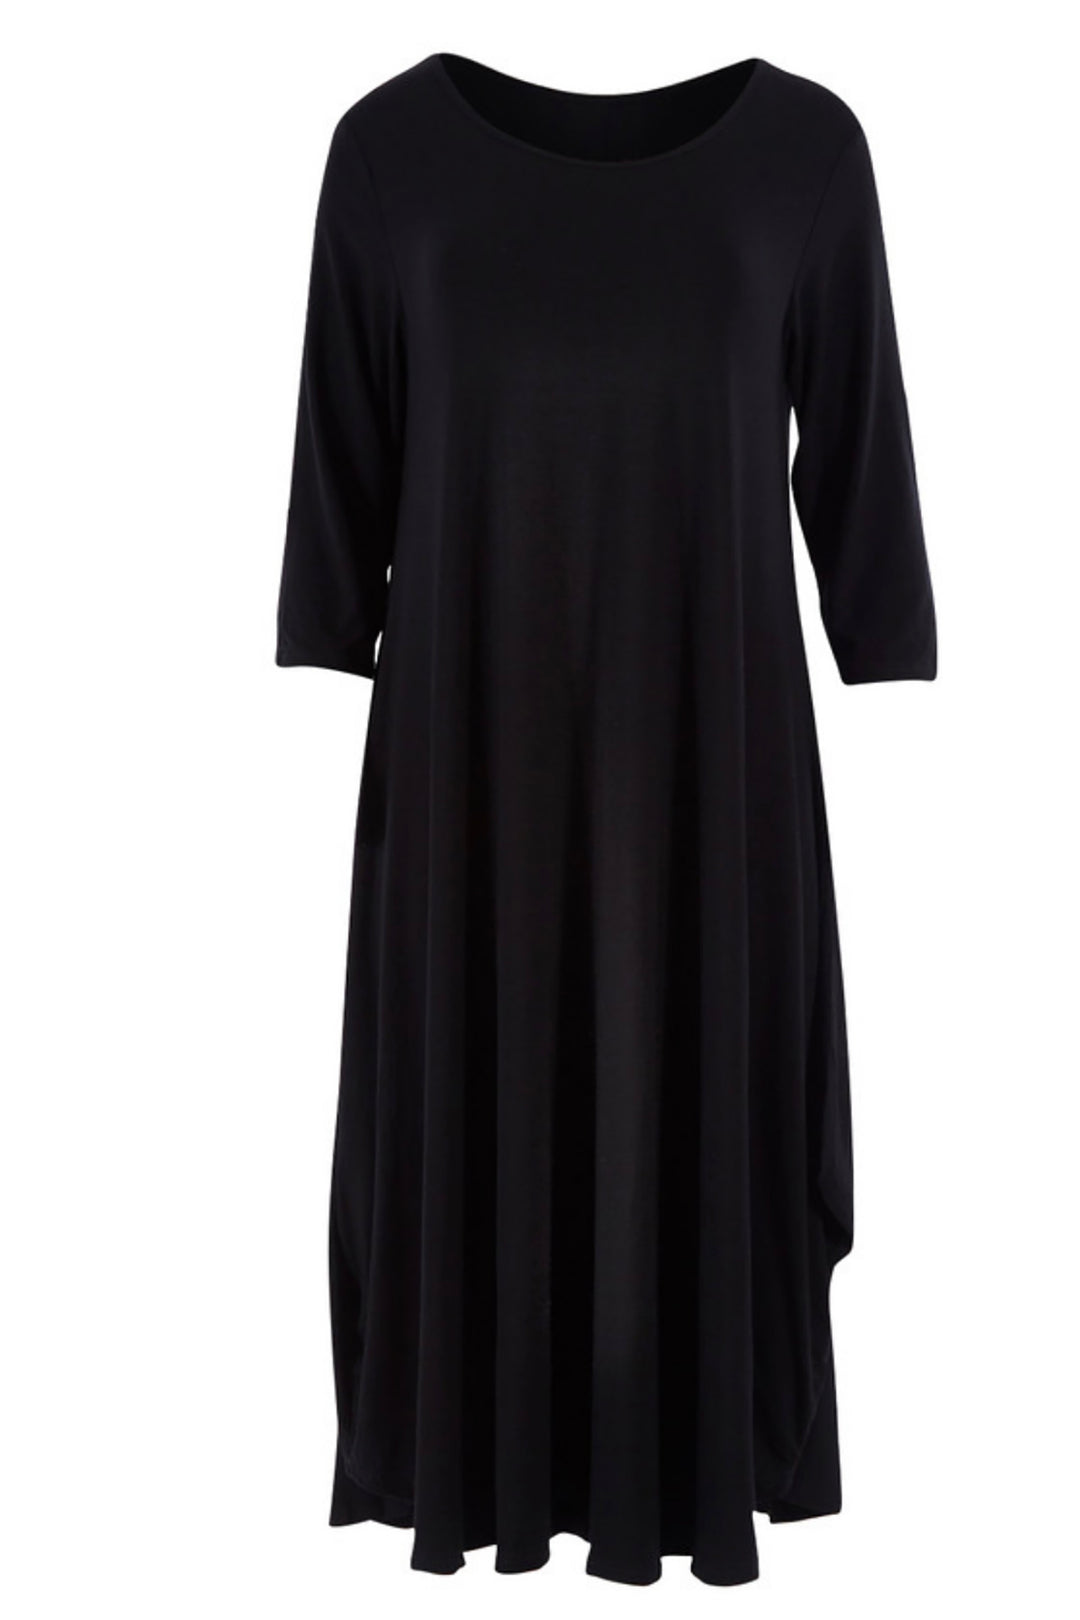 Bamboo maxi dress in black, sold and shipped from Pizazz Boutique Nelson Bay women's dresses online Australia